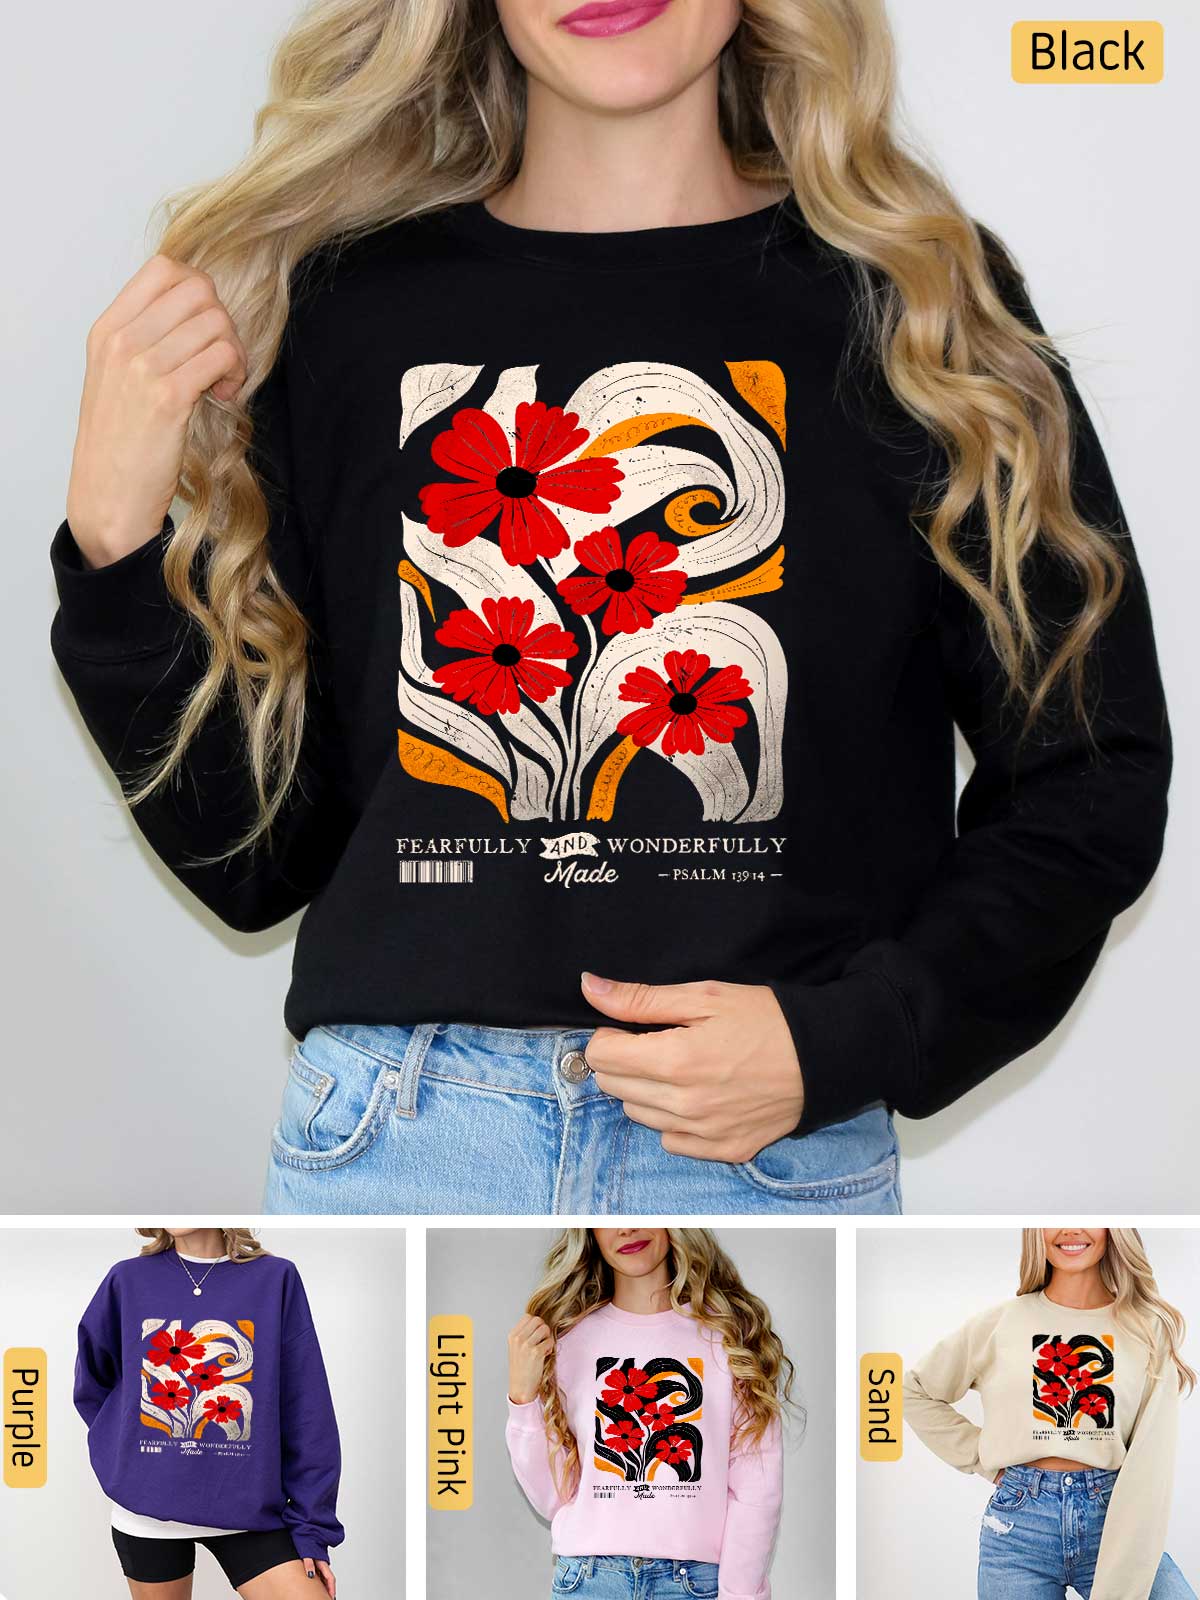 a woman wearing a black sweater with red flowers on it